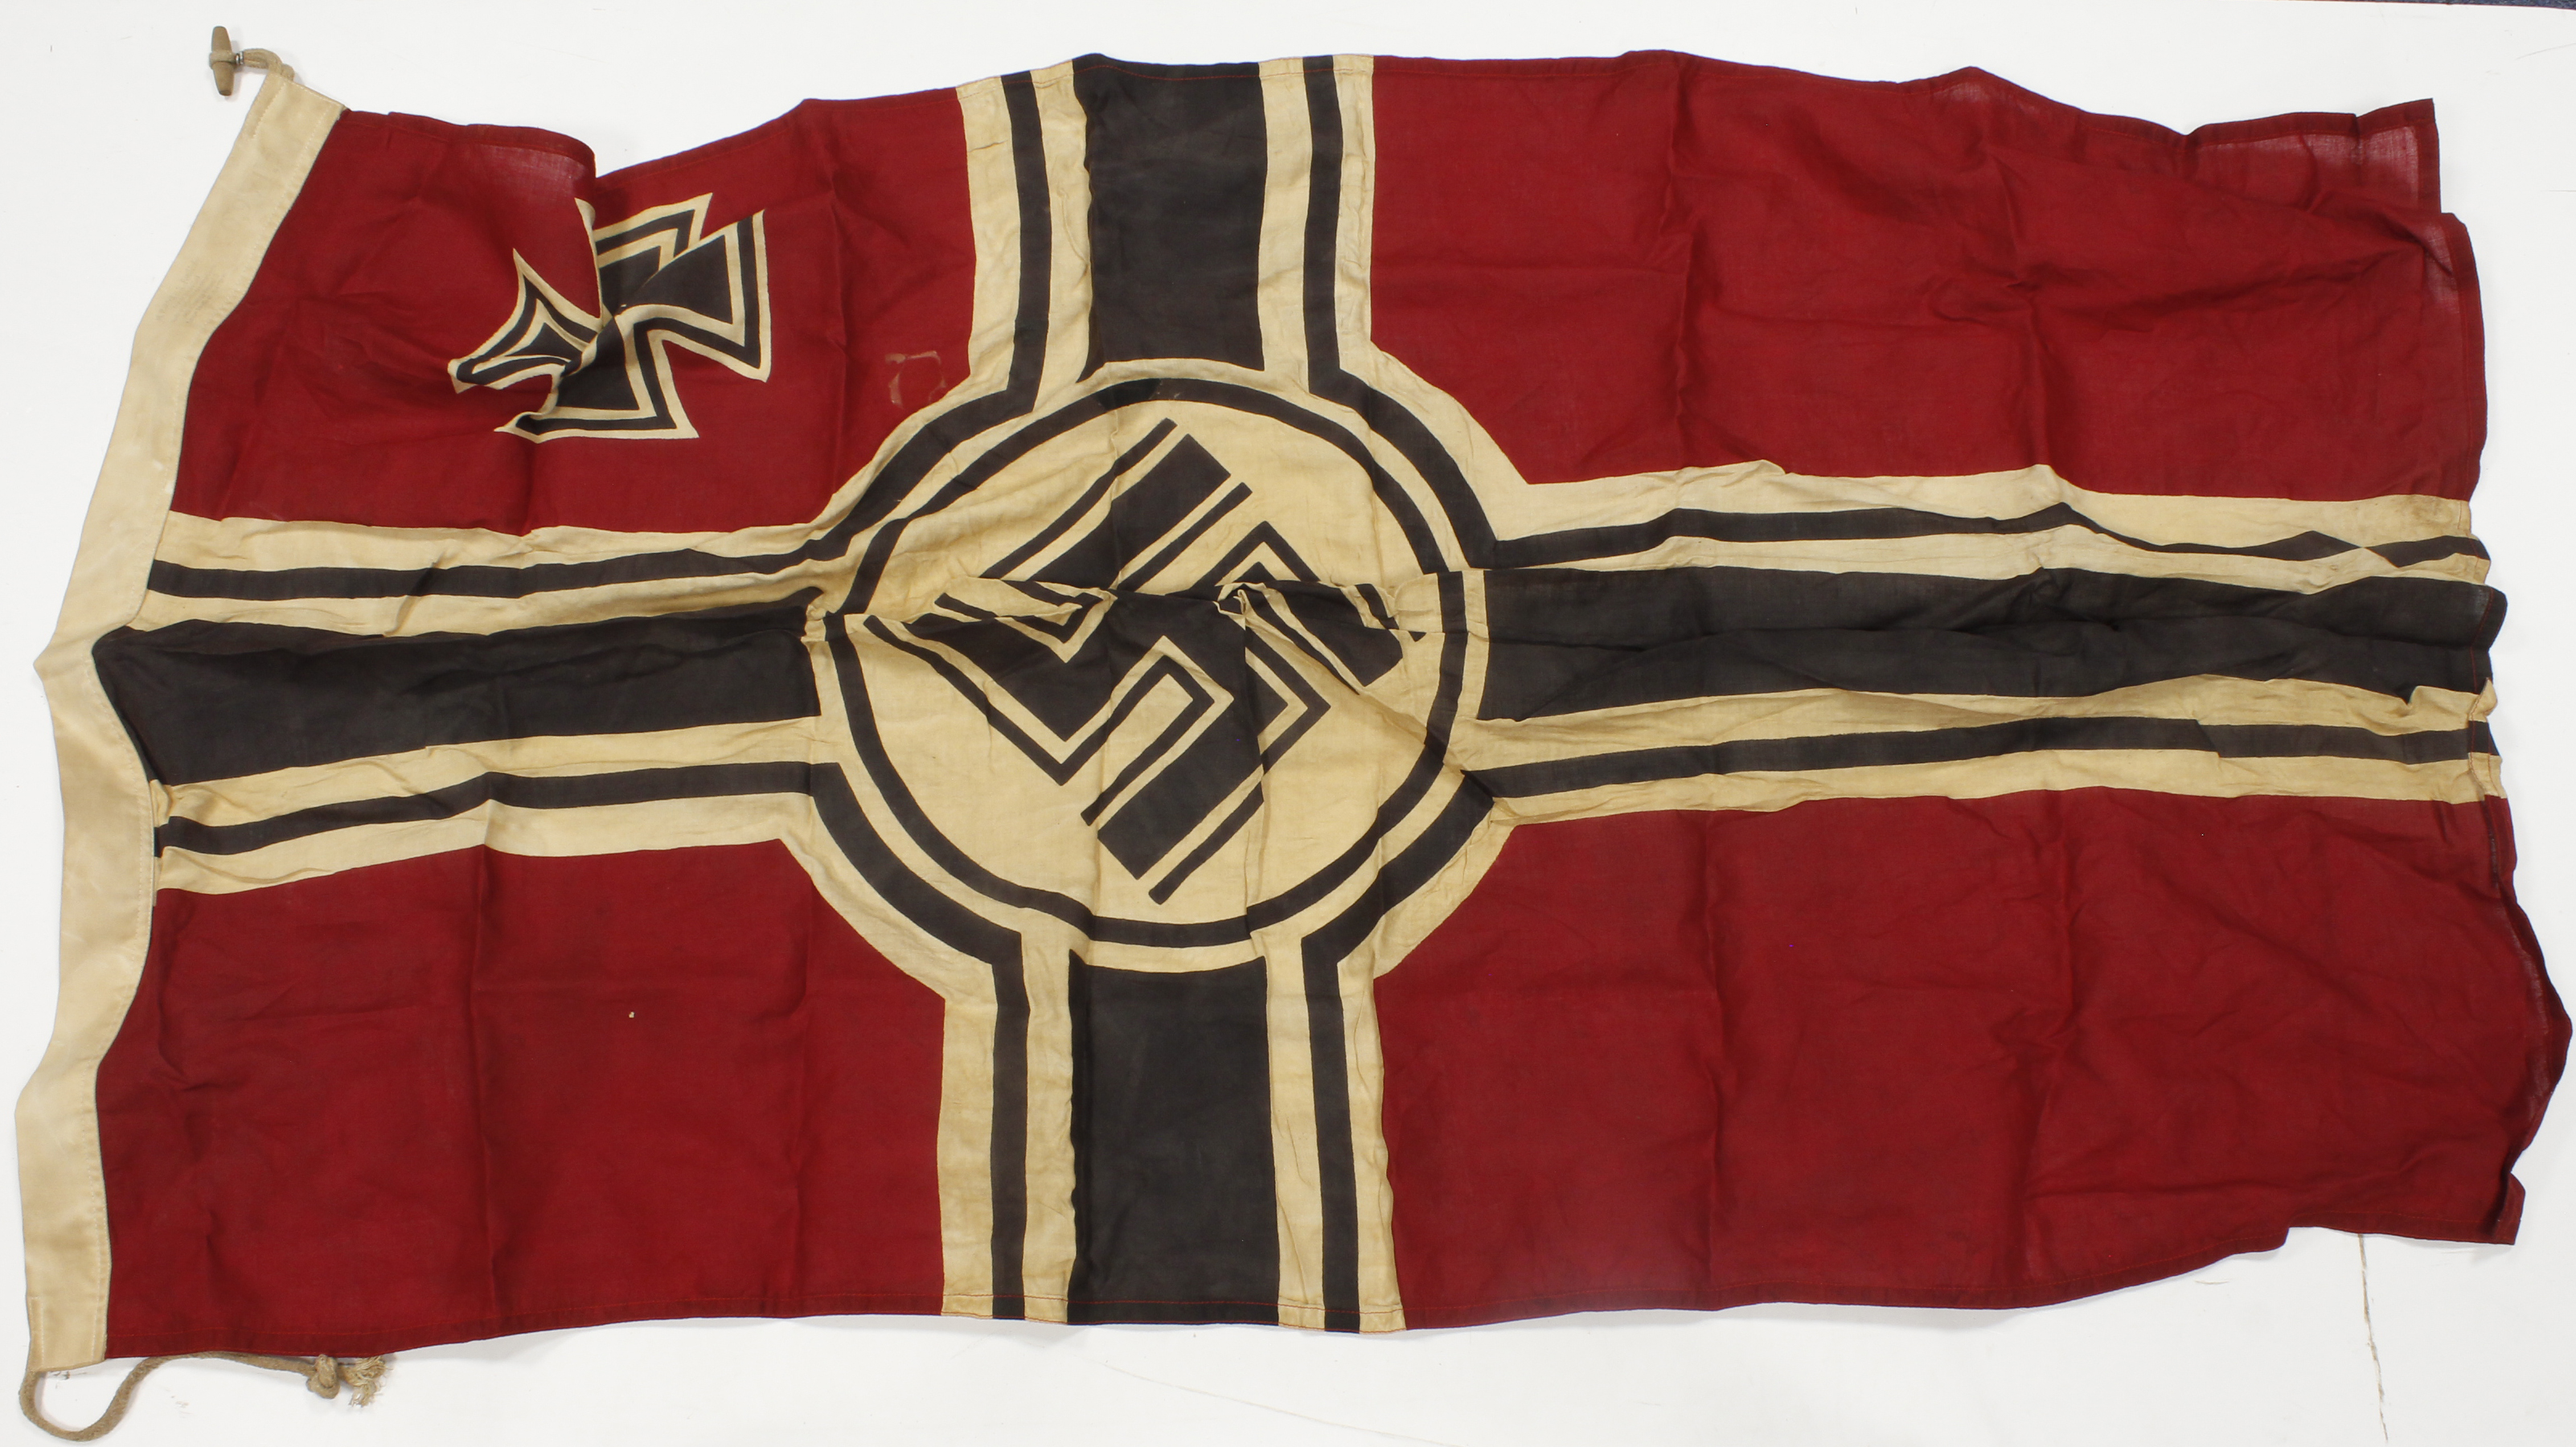 German 3rd Reich Battle Flag dated 1940, with various stampings (approx 66" x 33")